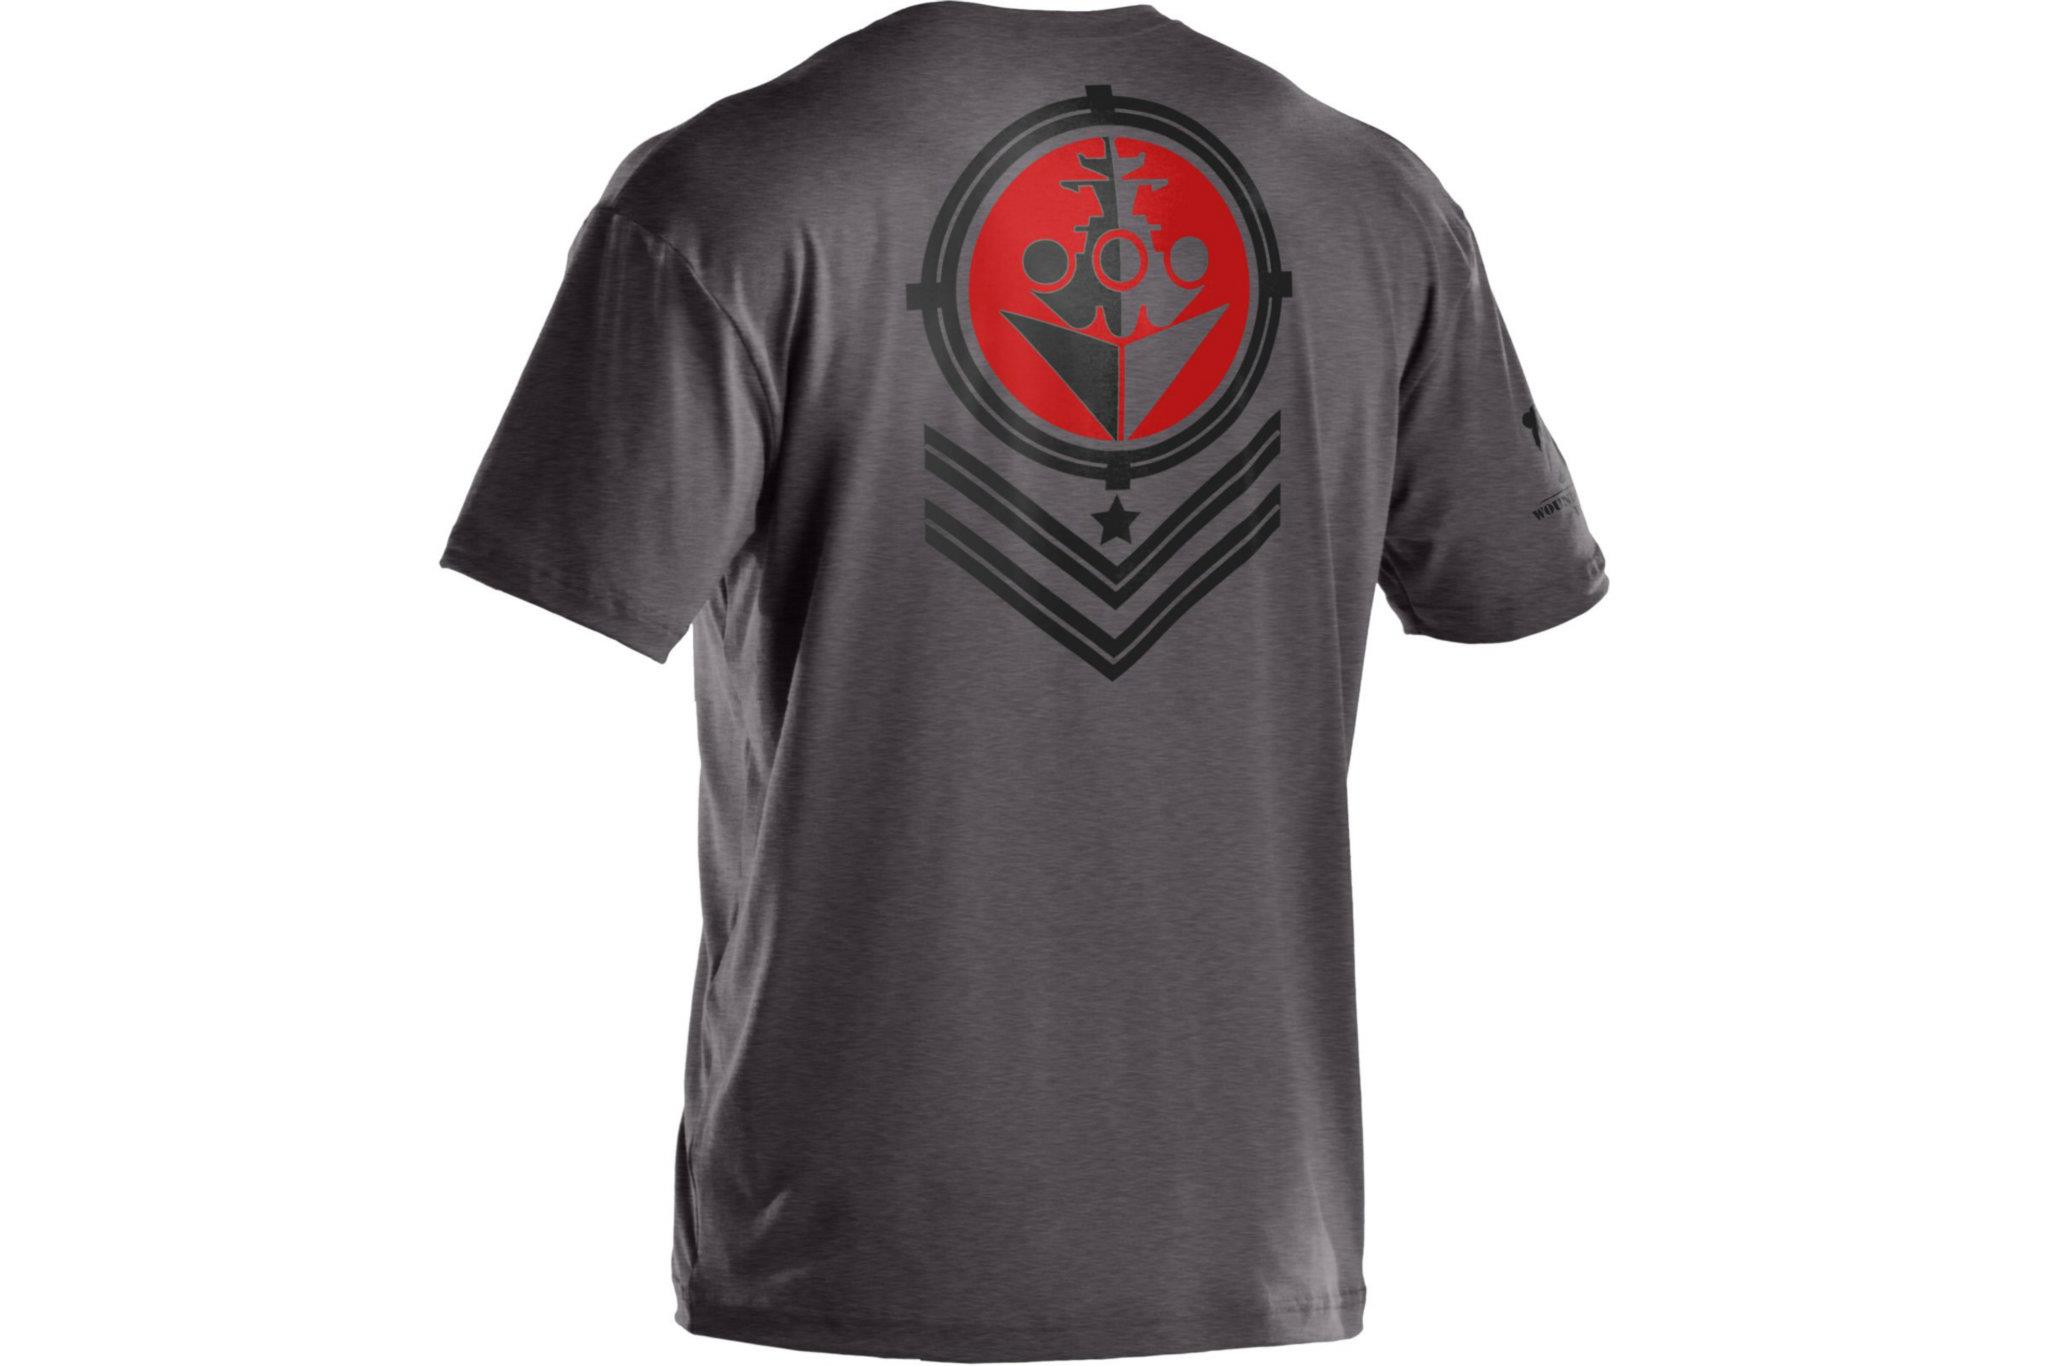 wounded warrior apparel under armour